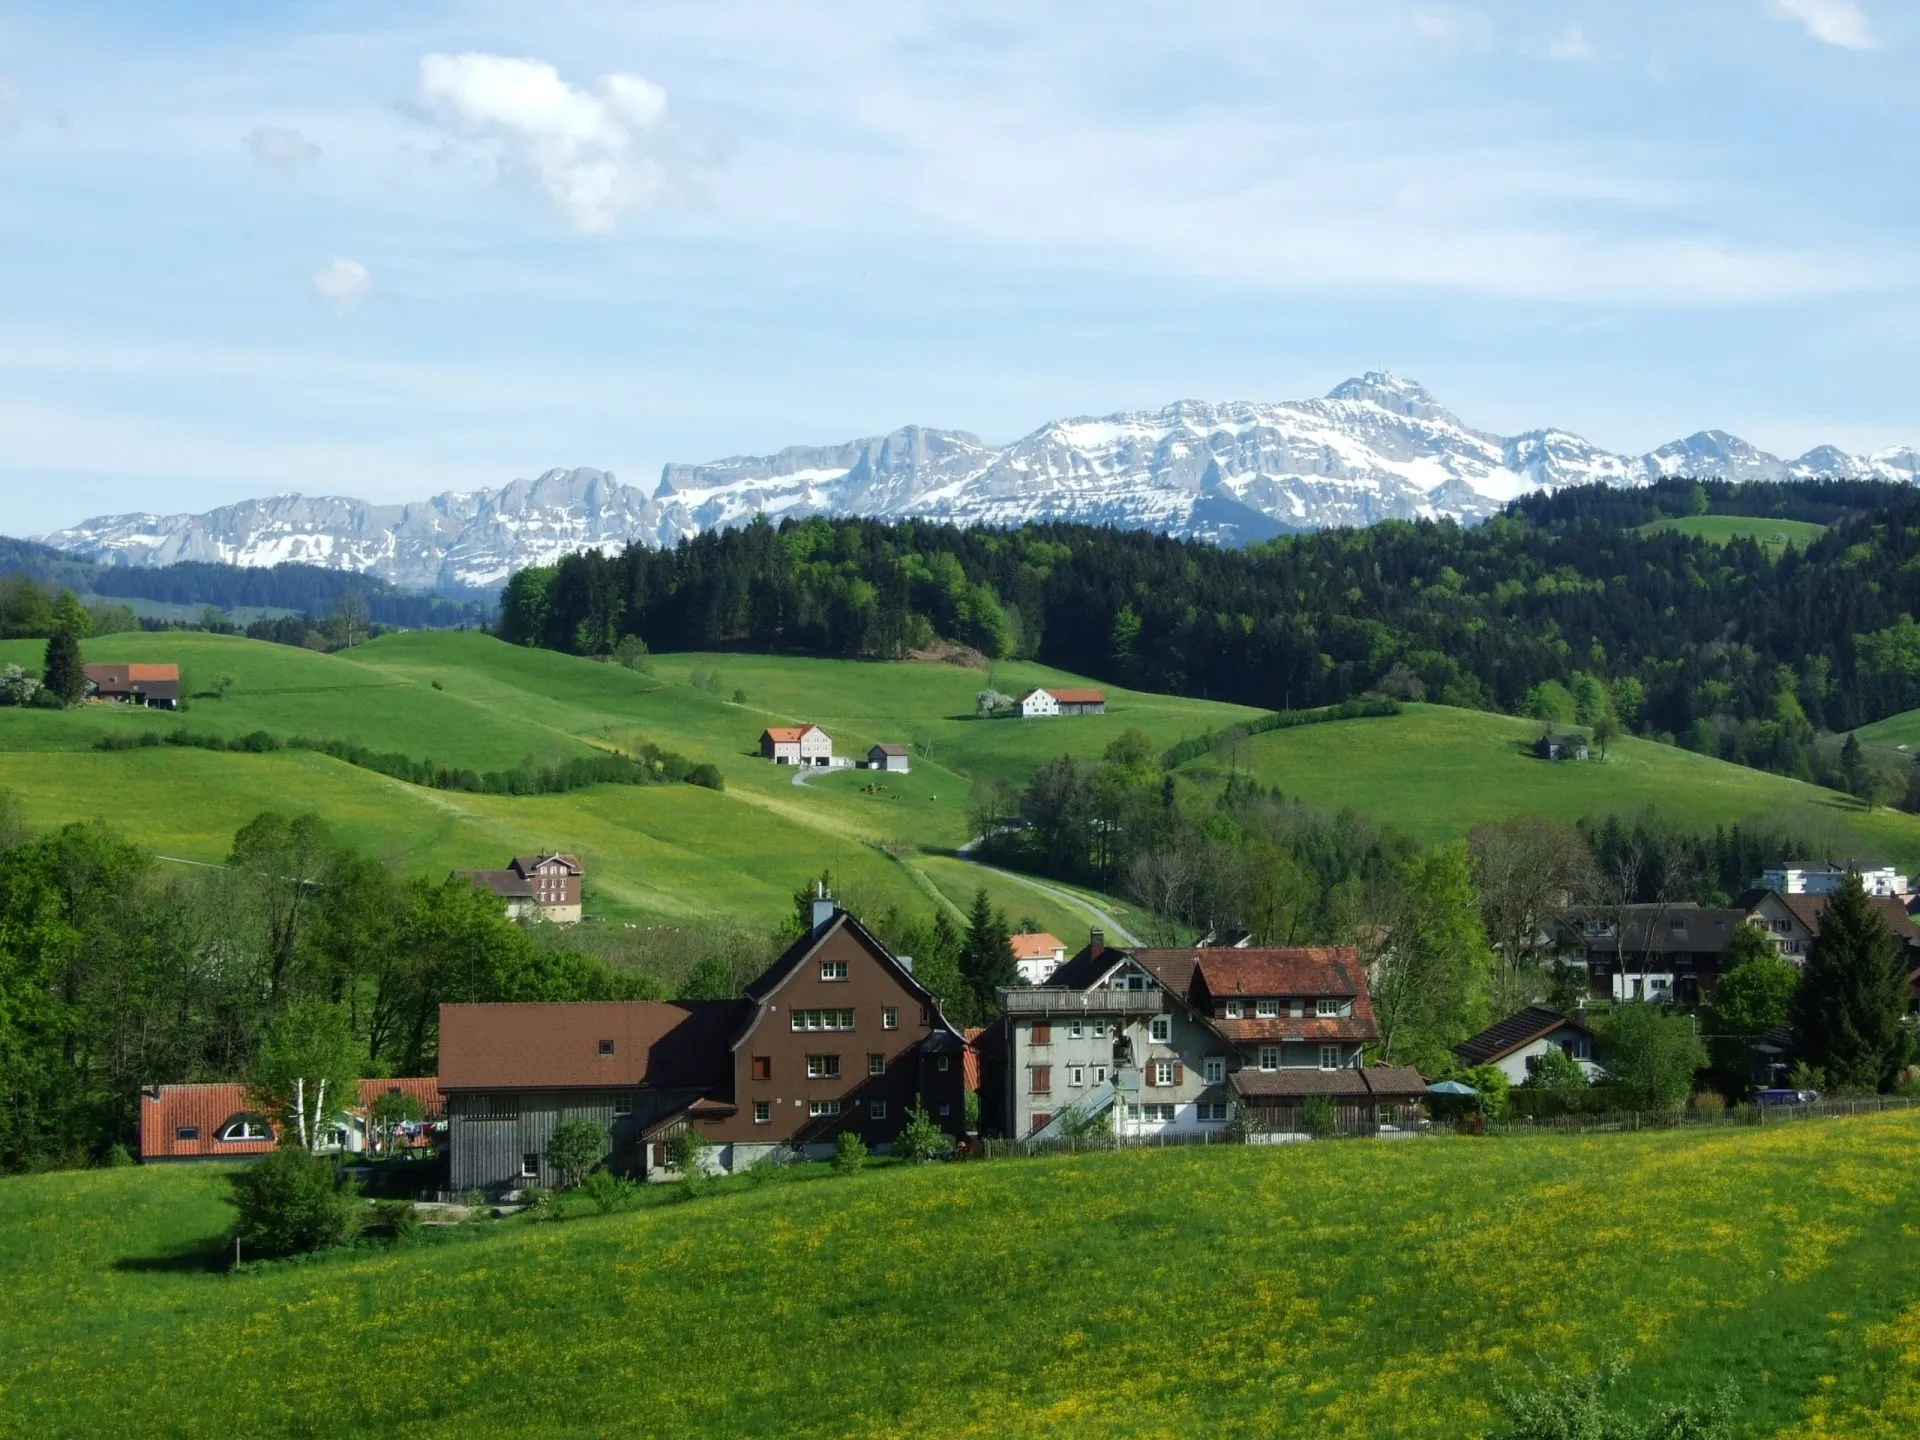 Typical herisau pastures and villages